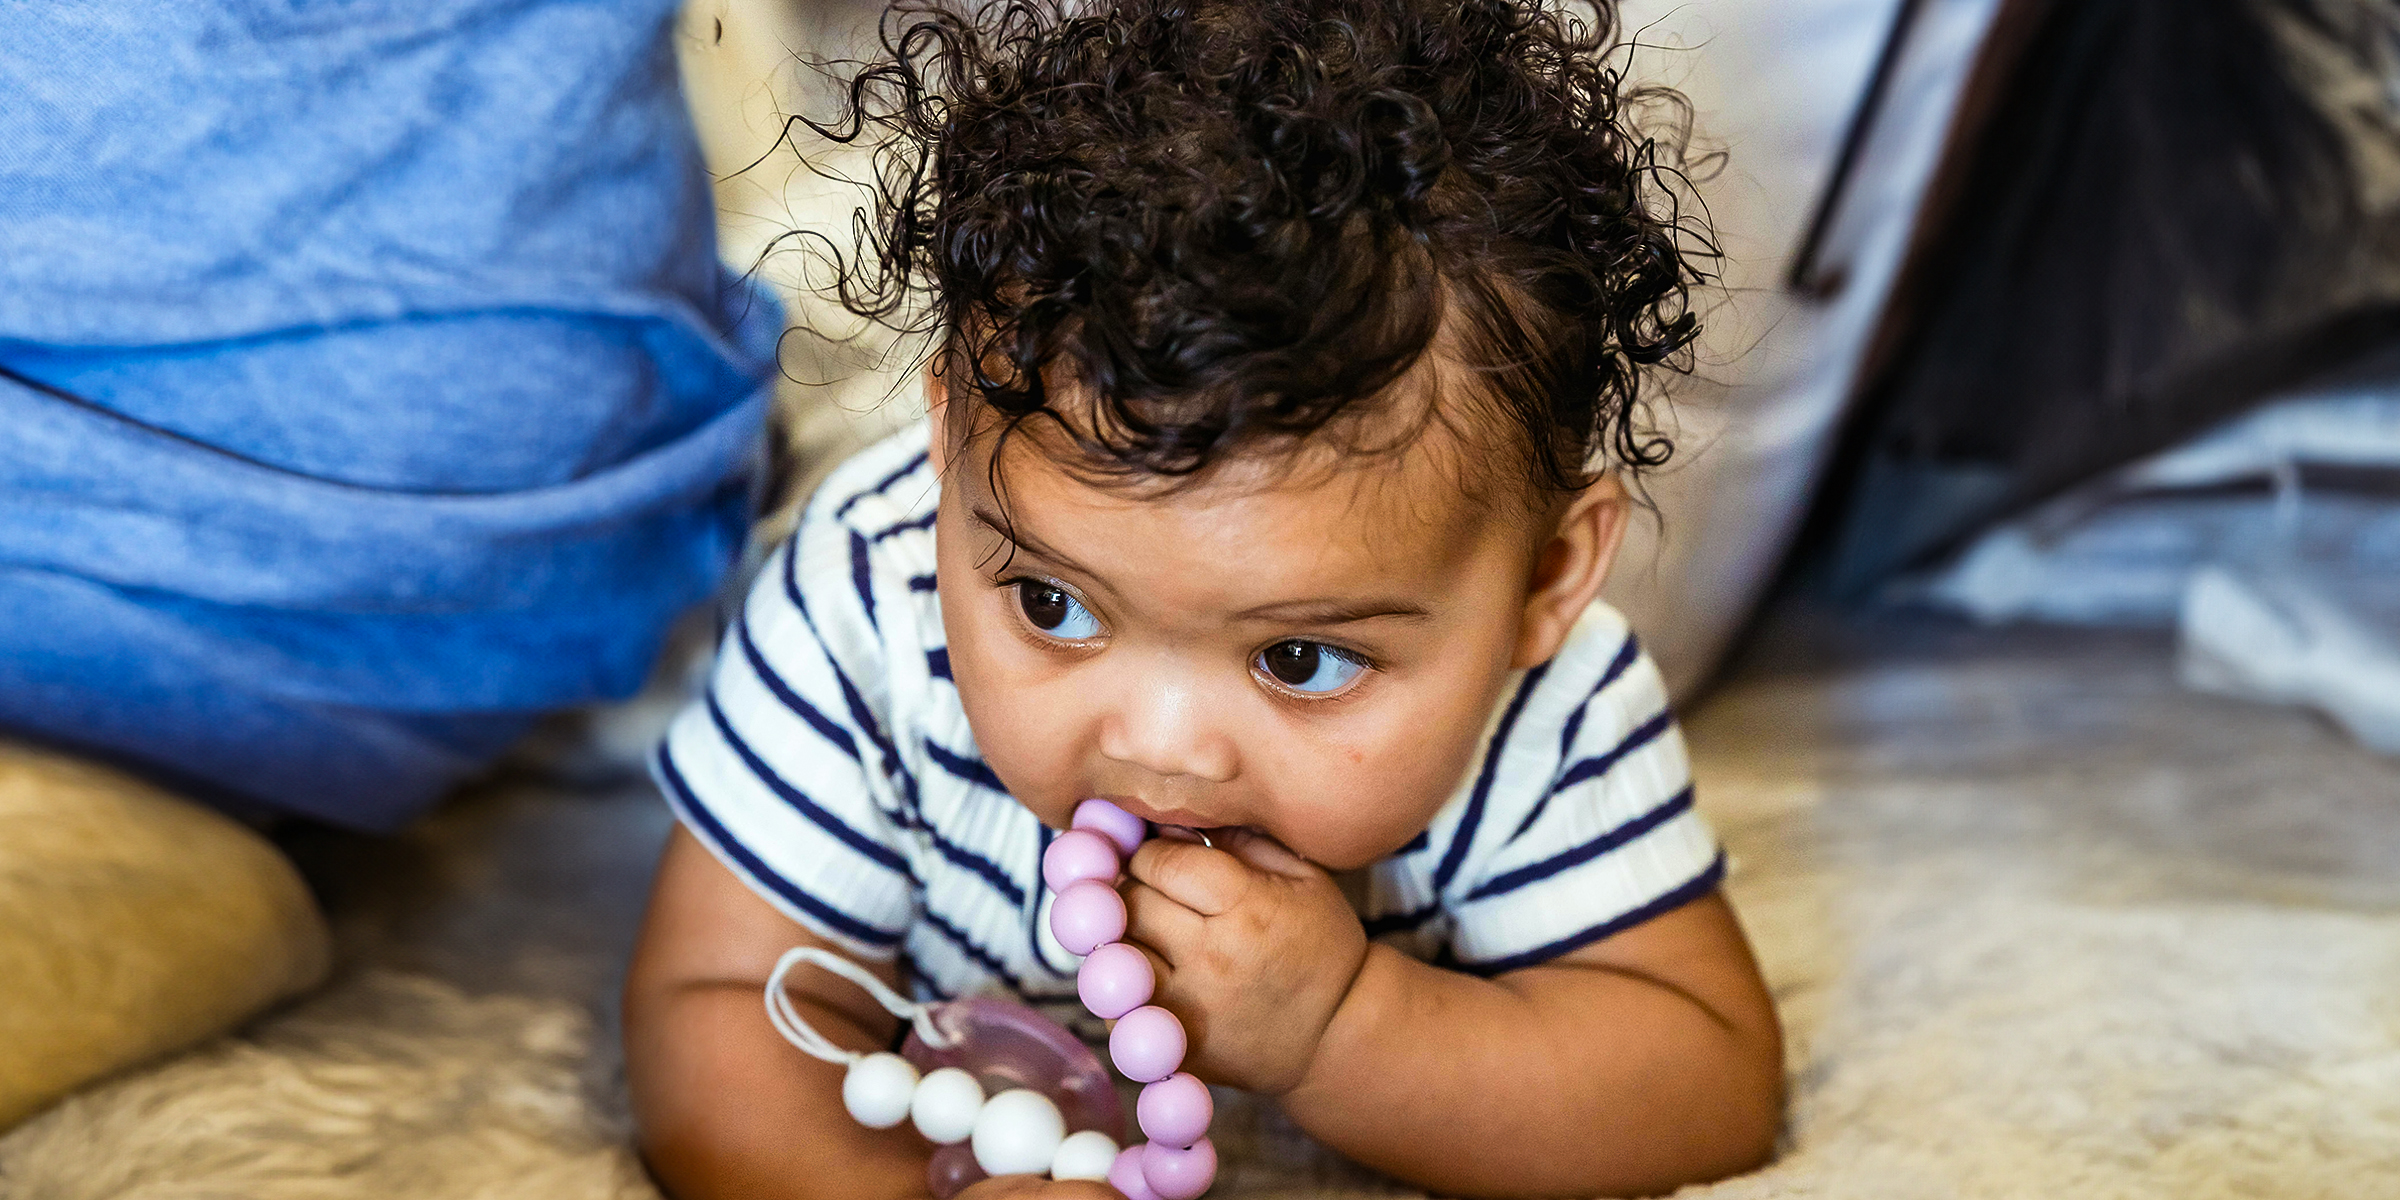 A toddler playing with silicone beads | Source: Pexels/Keira Burton